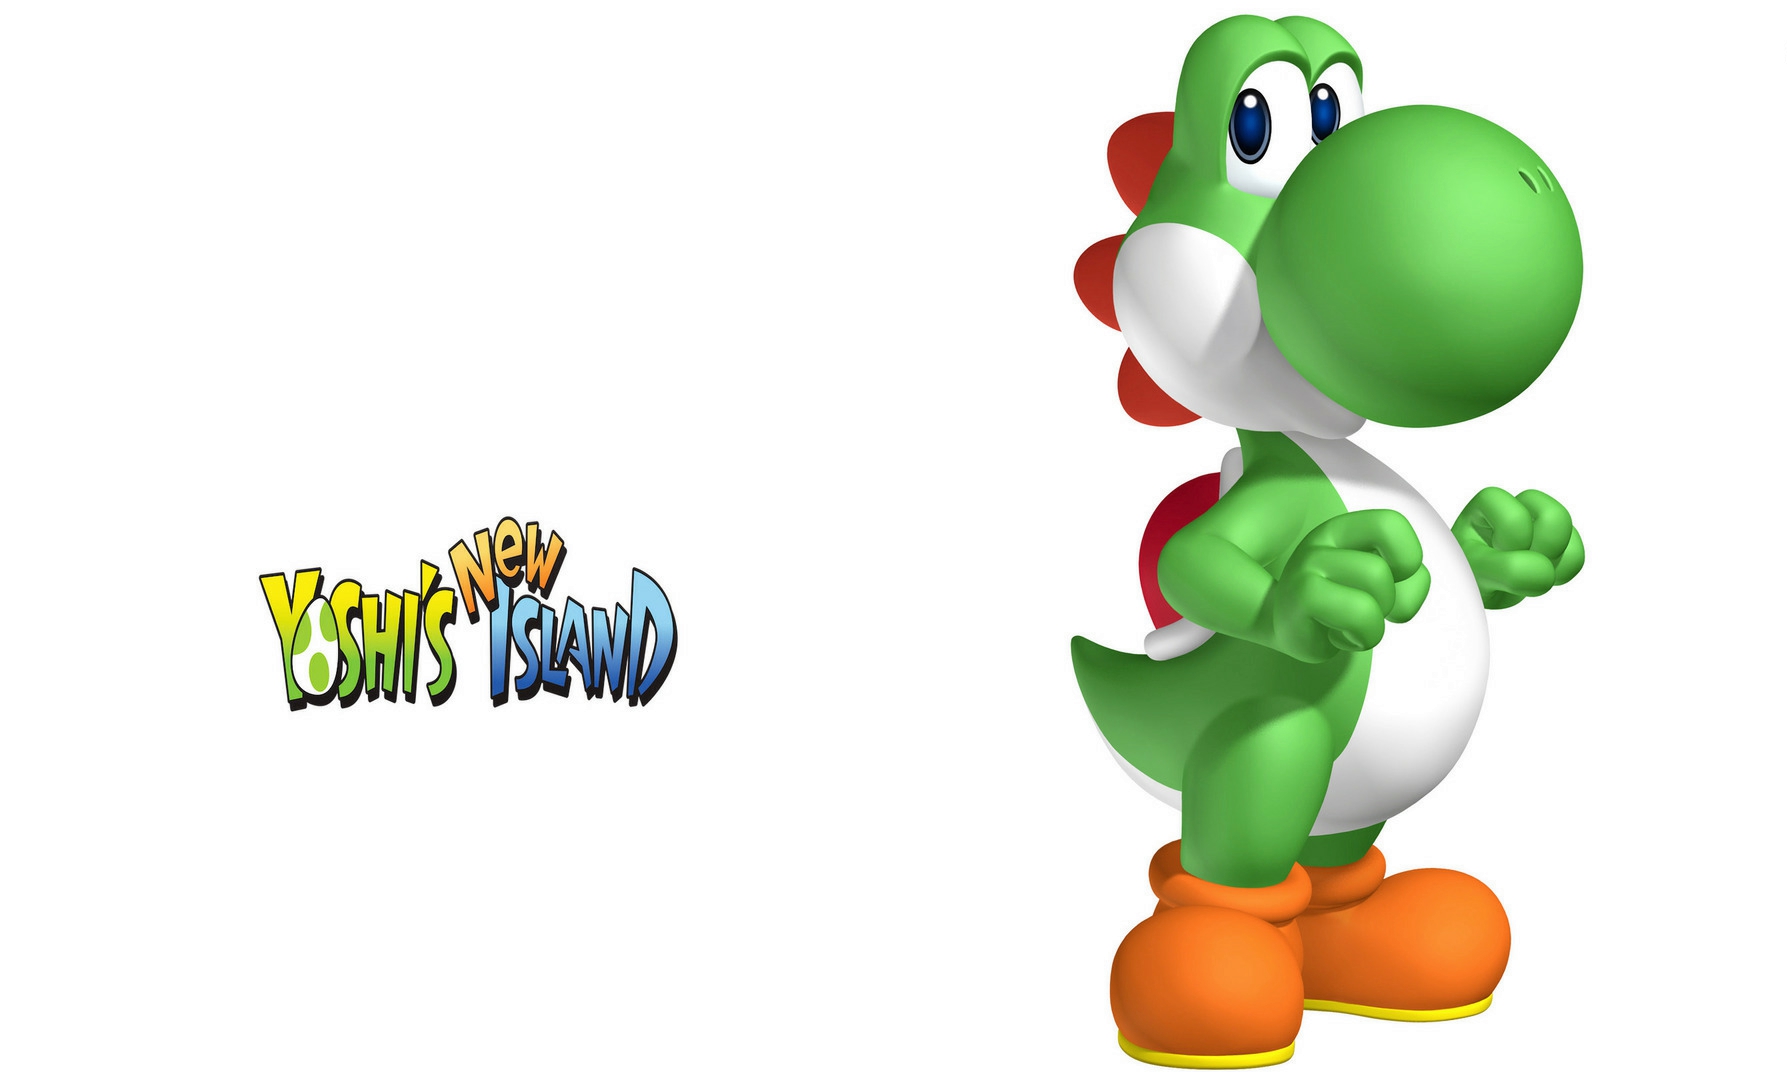 Mario Yoshi Dash Wallpaper Hd Games 4k Wallpapers Images Photos And Background Wallpapers Den